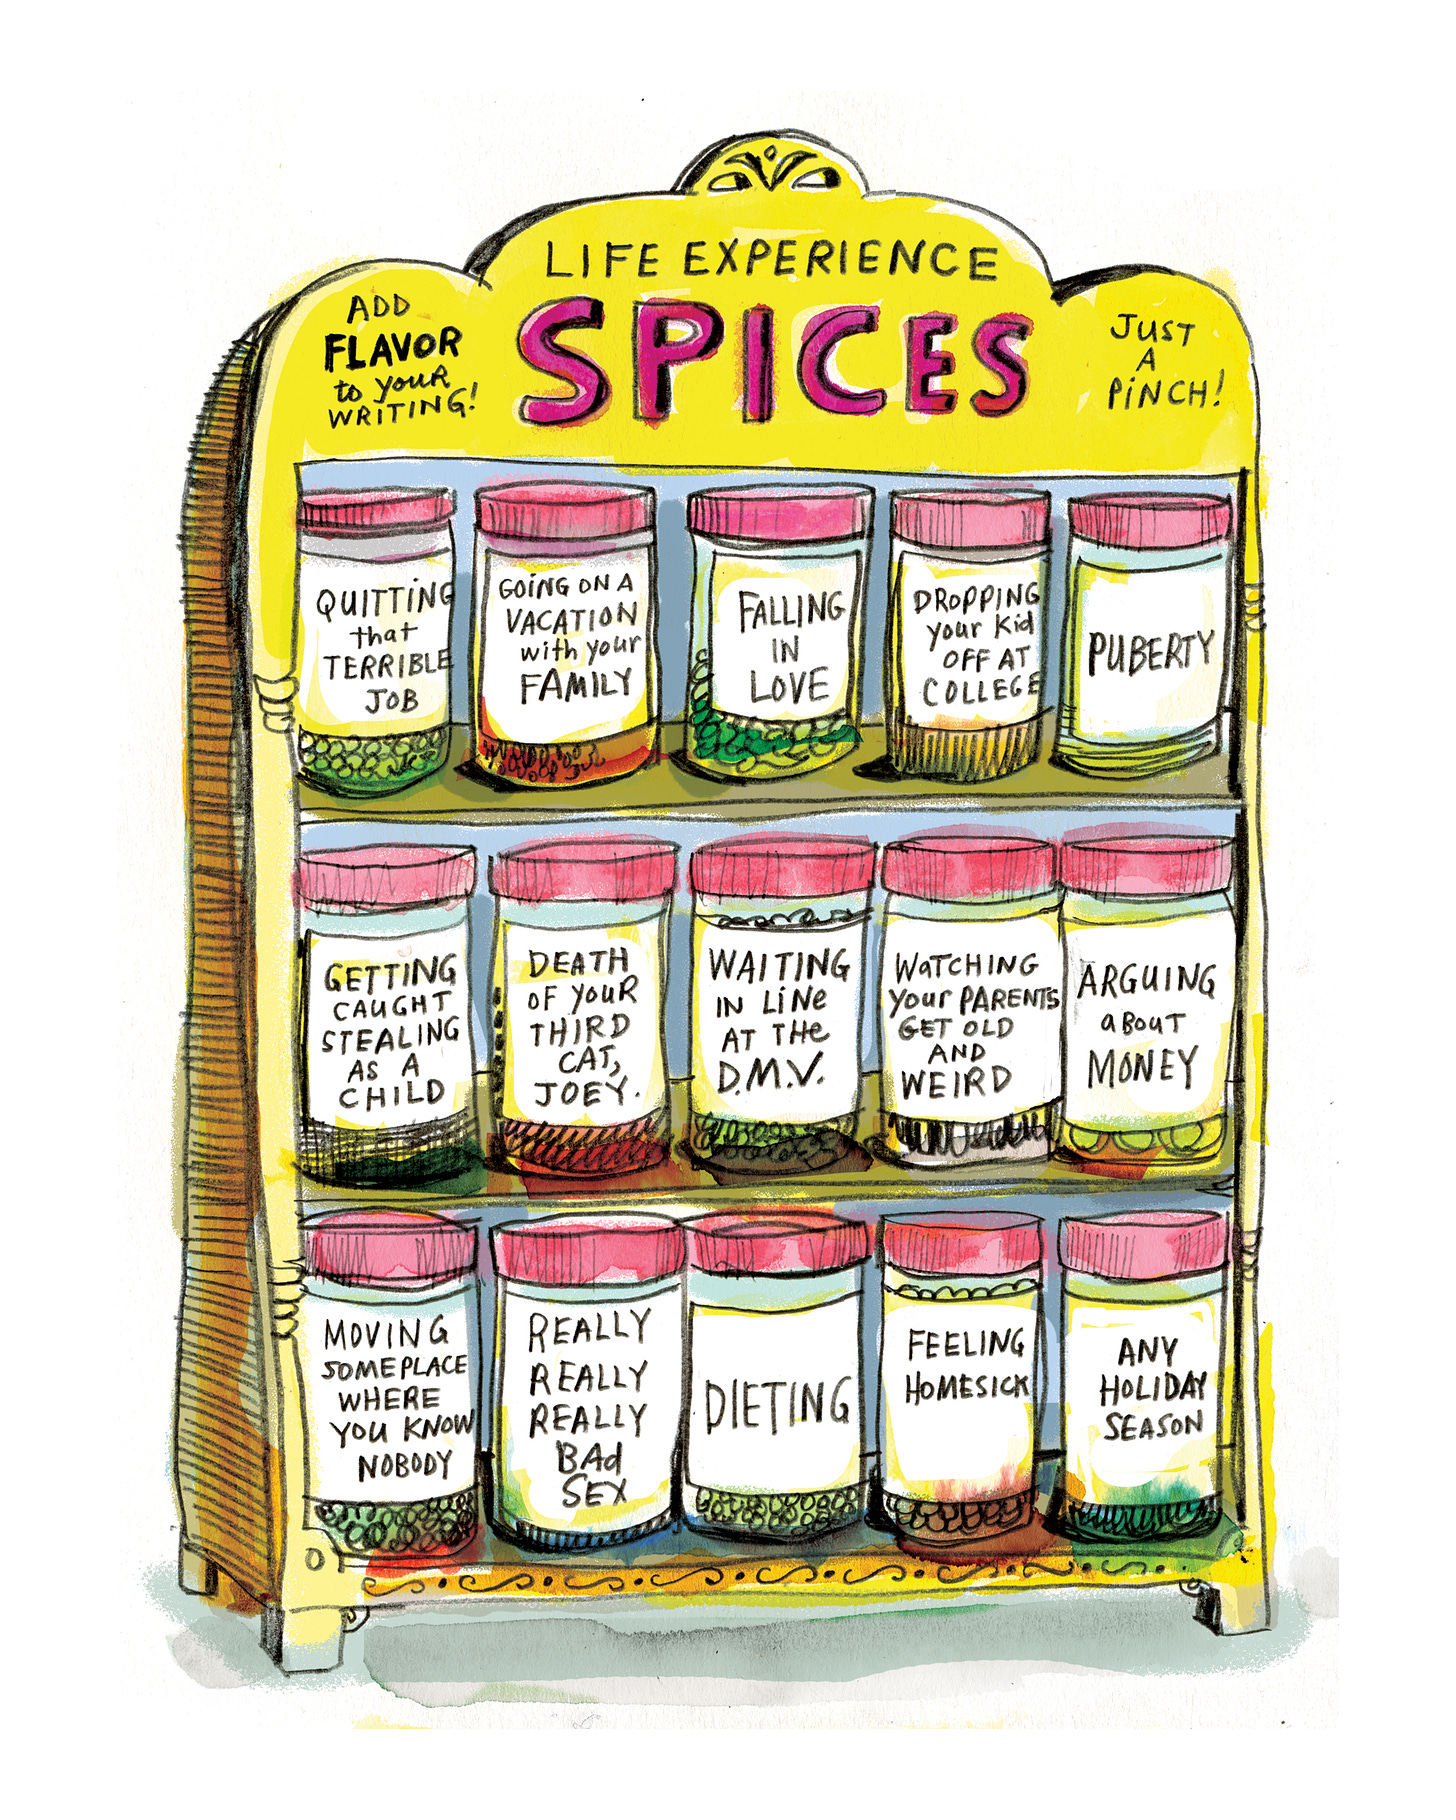 Illustration of a spice rack. The spices are labelled with life experiences such as puberty, falling in love, and quitting that terrible job